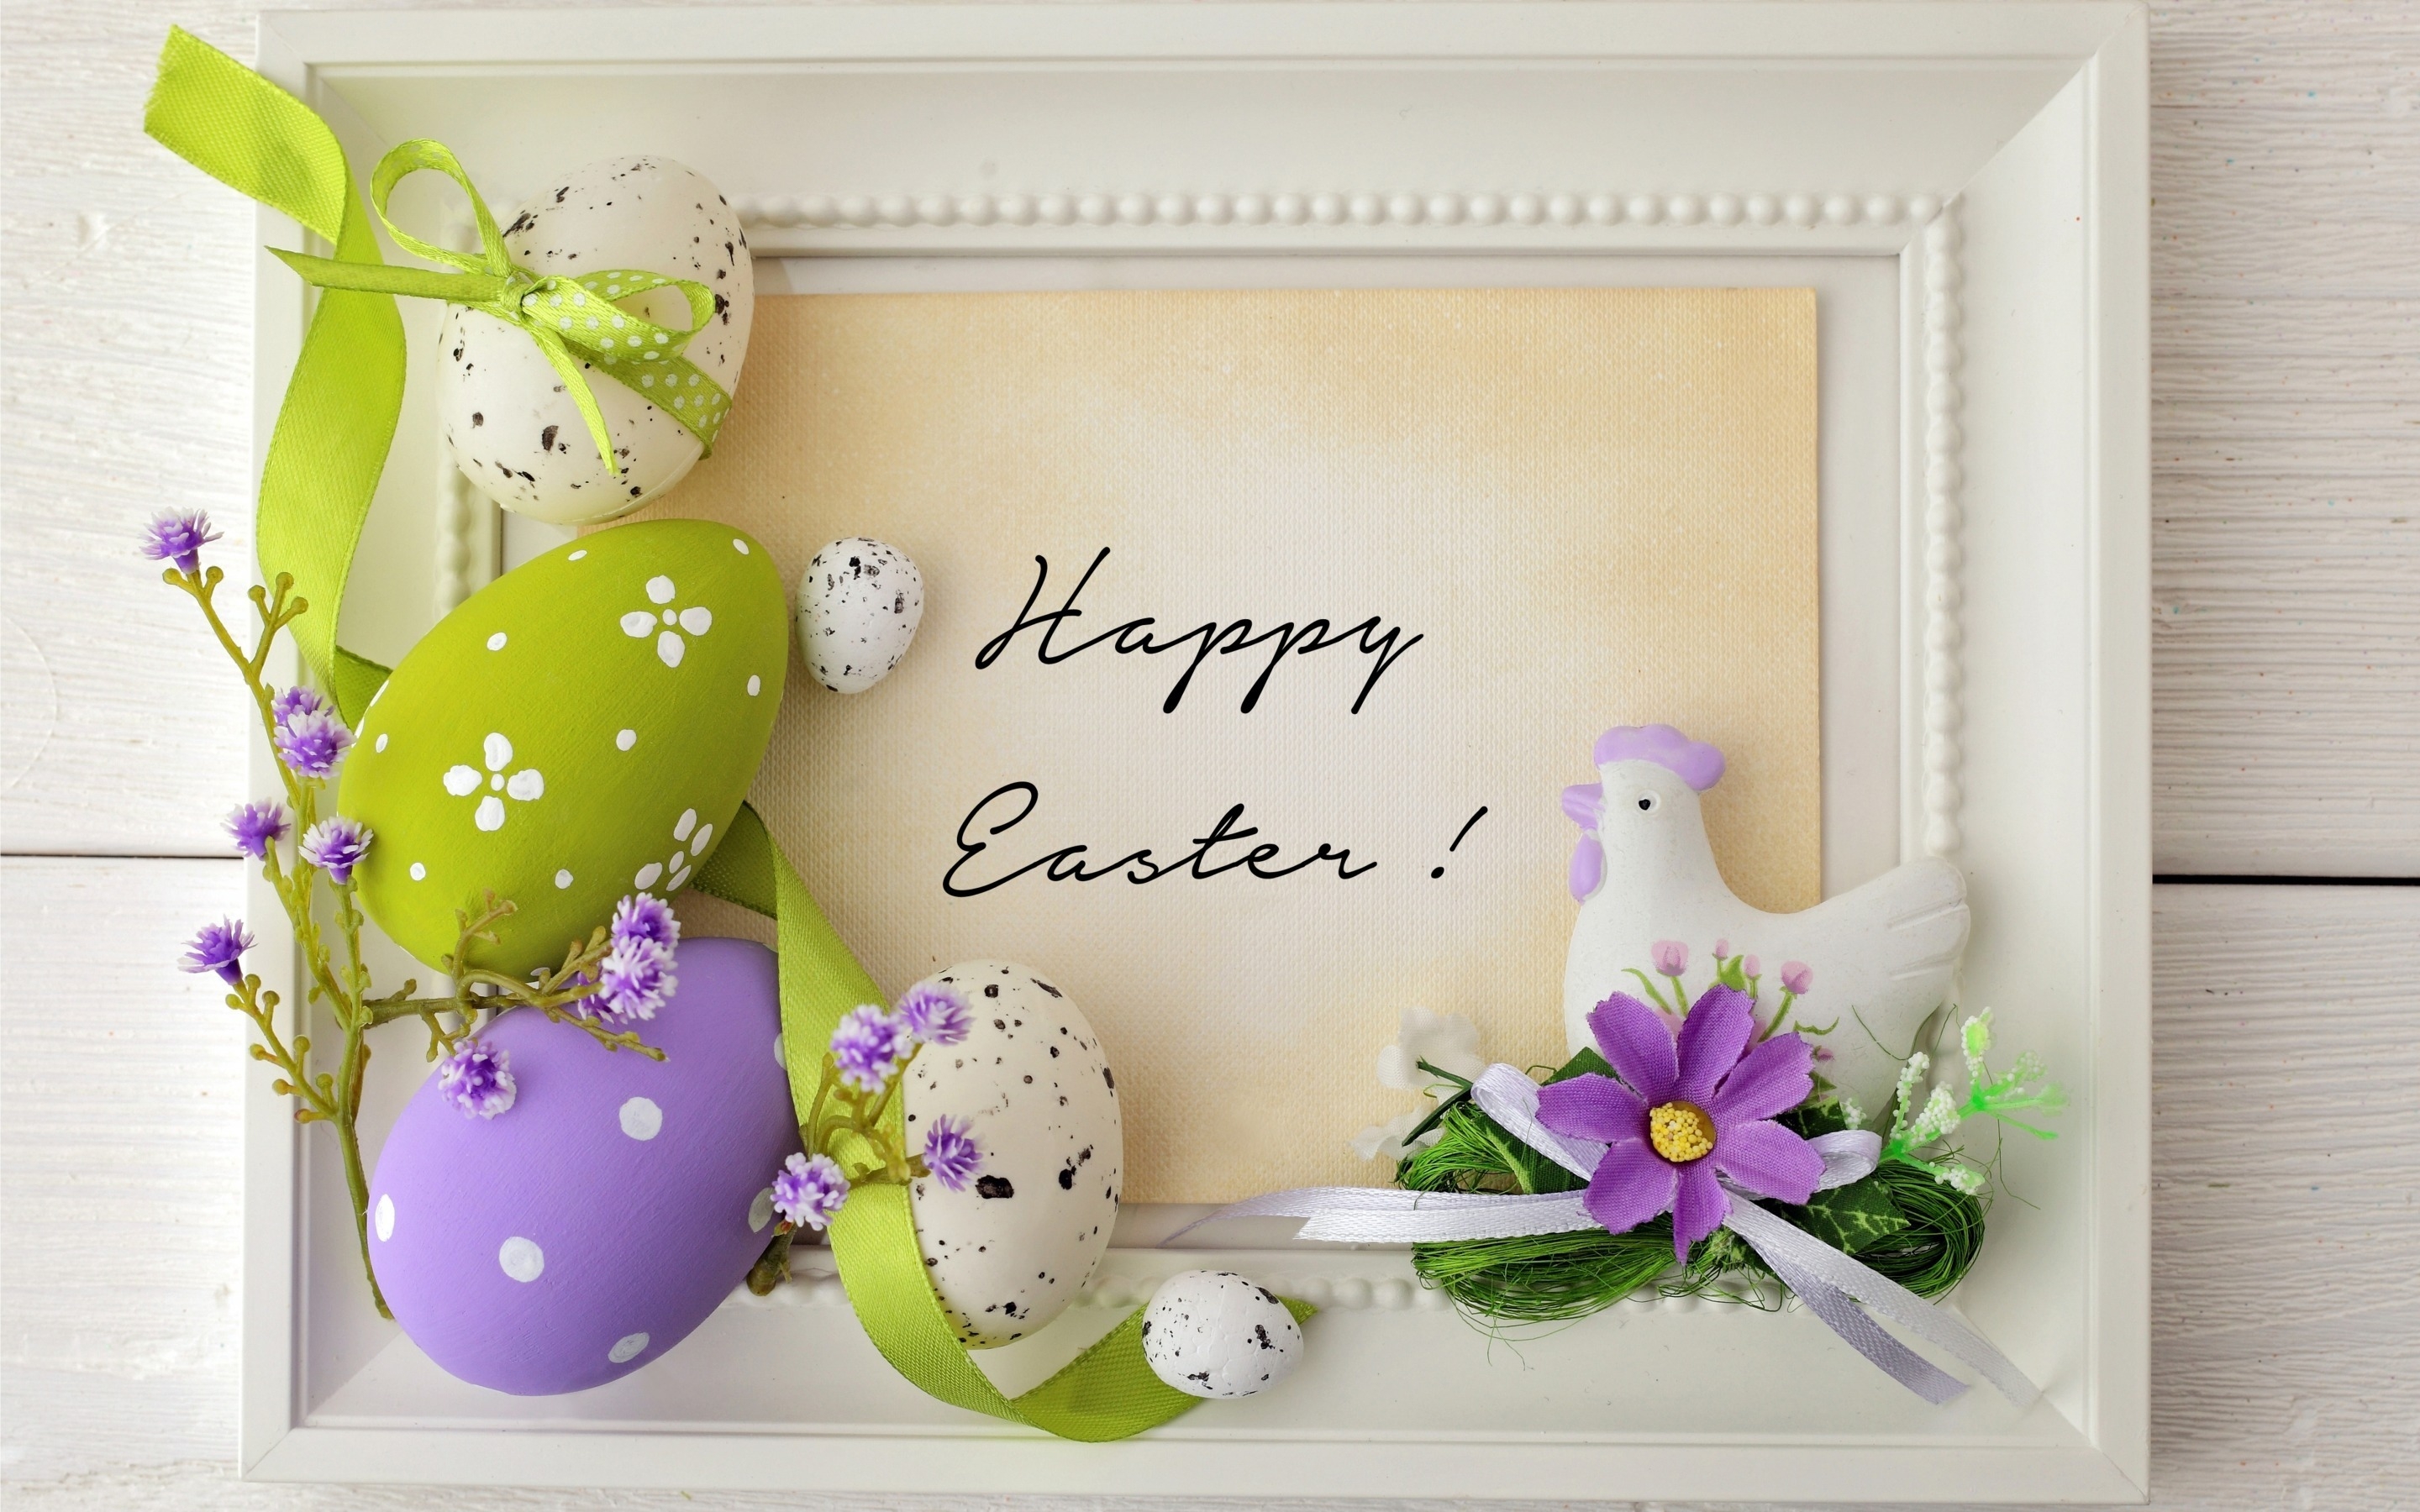 Happy Easter 2015 for 2880 x 1800 Retina Display resolution